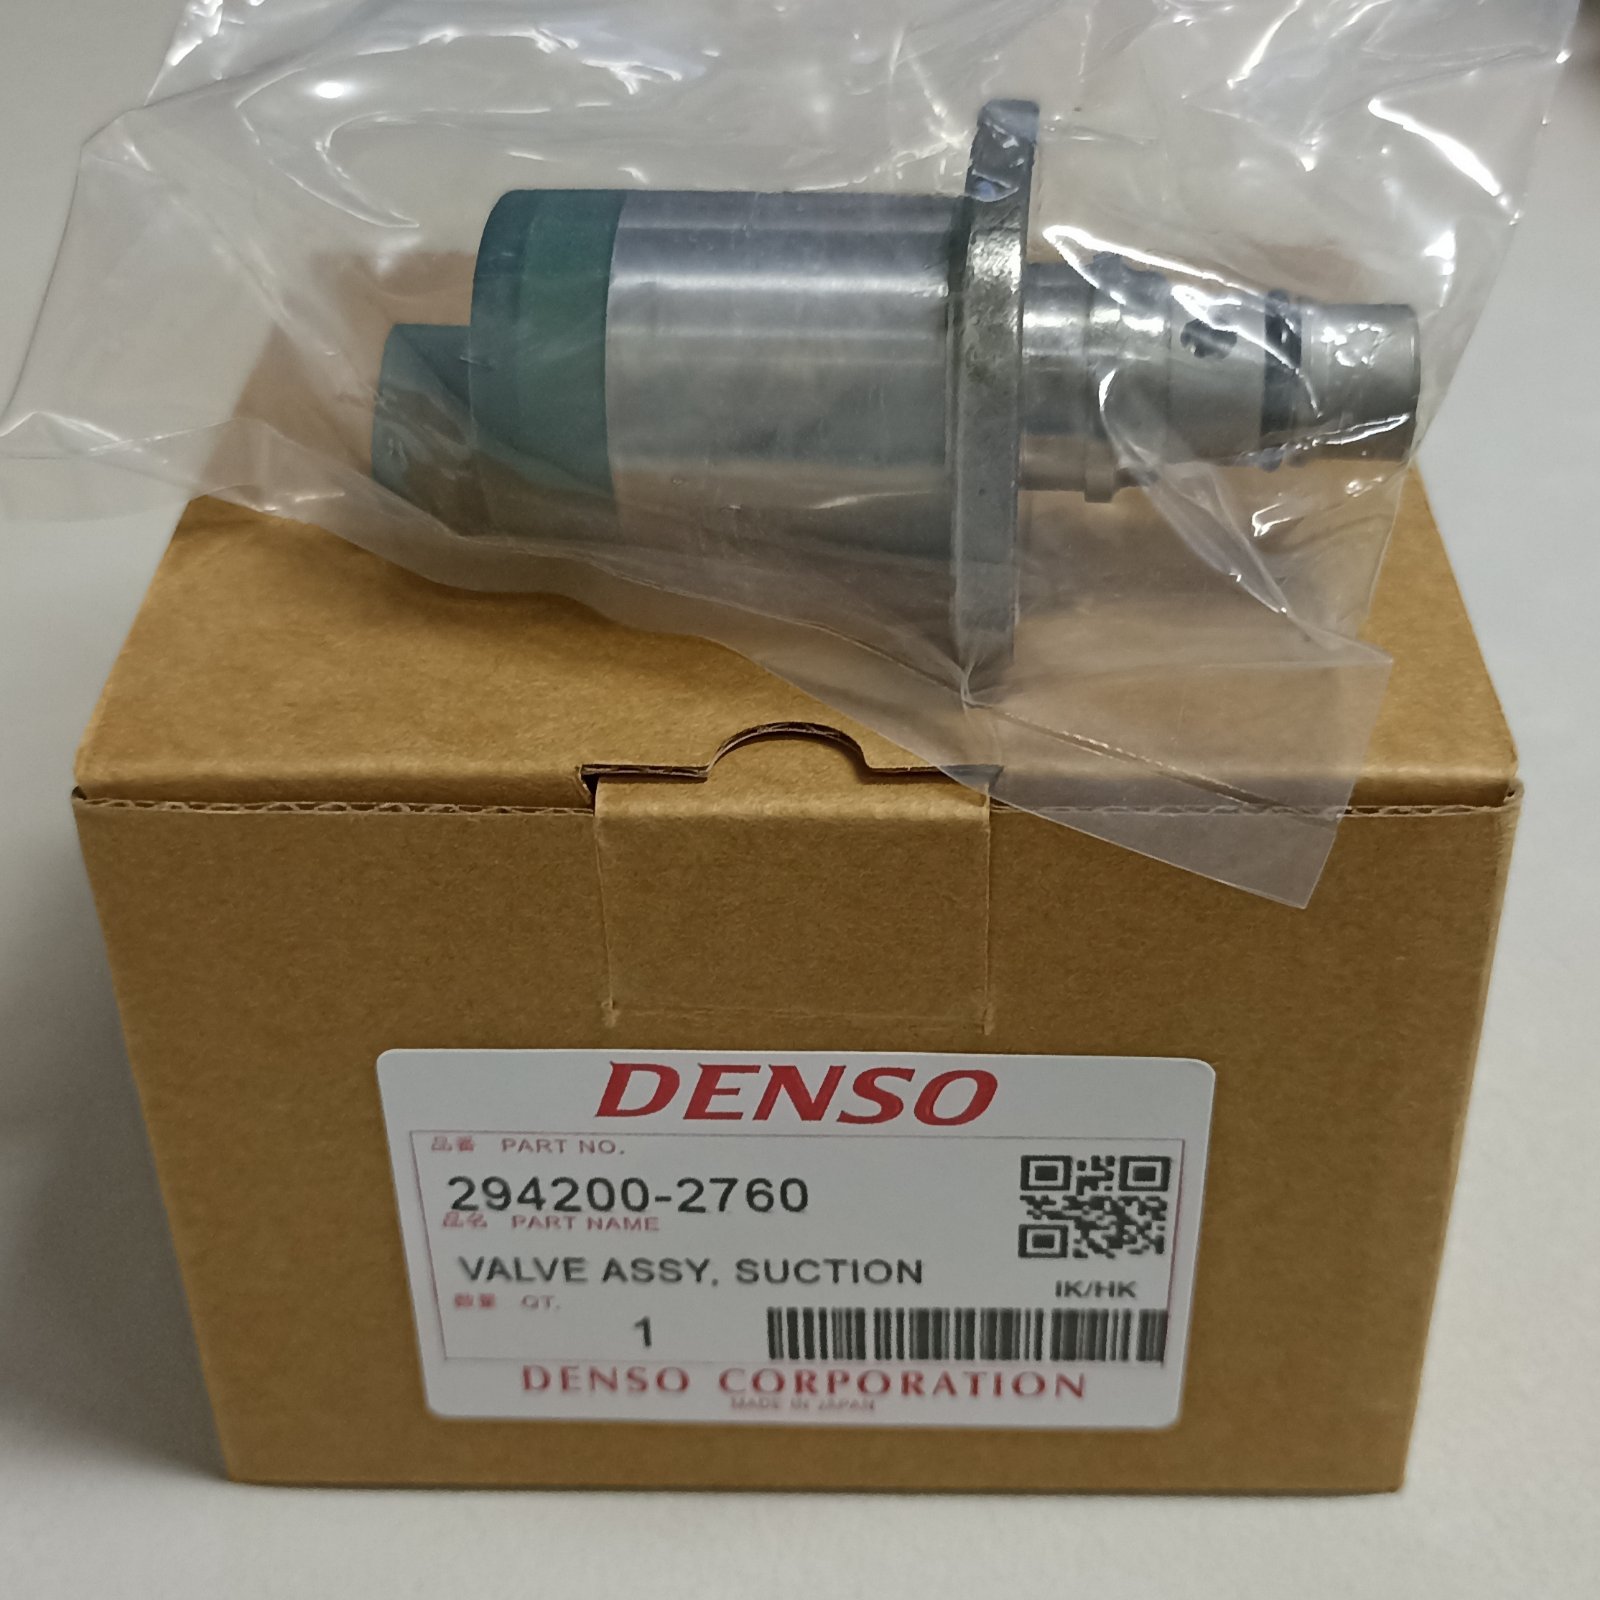 DENSO 294200-2760 ISUZU HOLDEN D-MAX DMAX RODEO 2.5 3.0 SUCTION CONTROL VALVE 